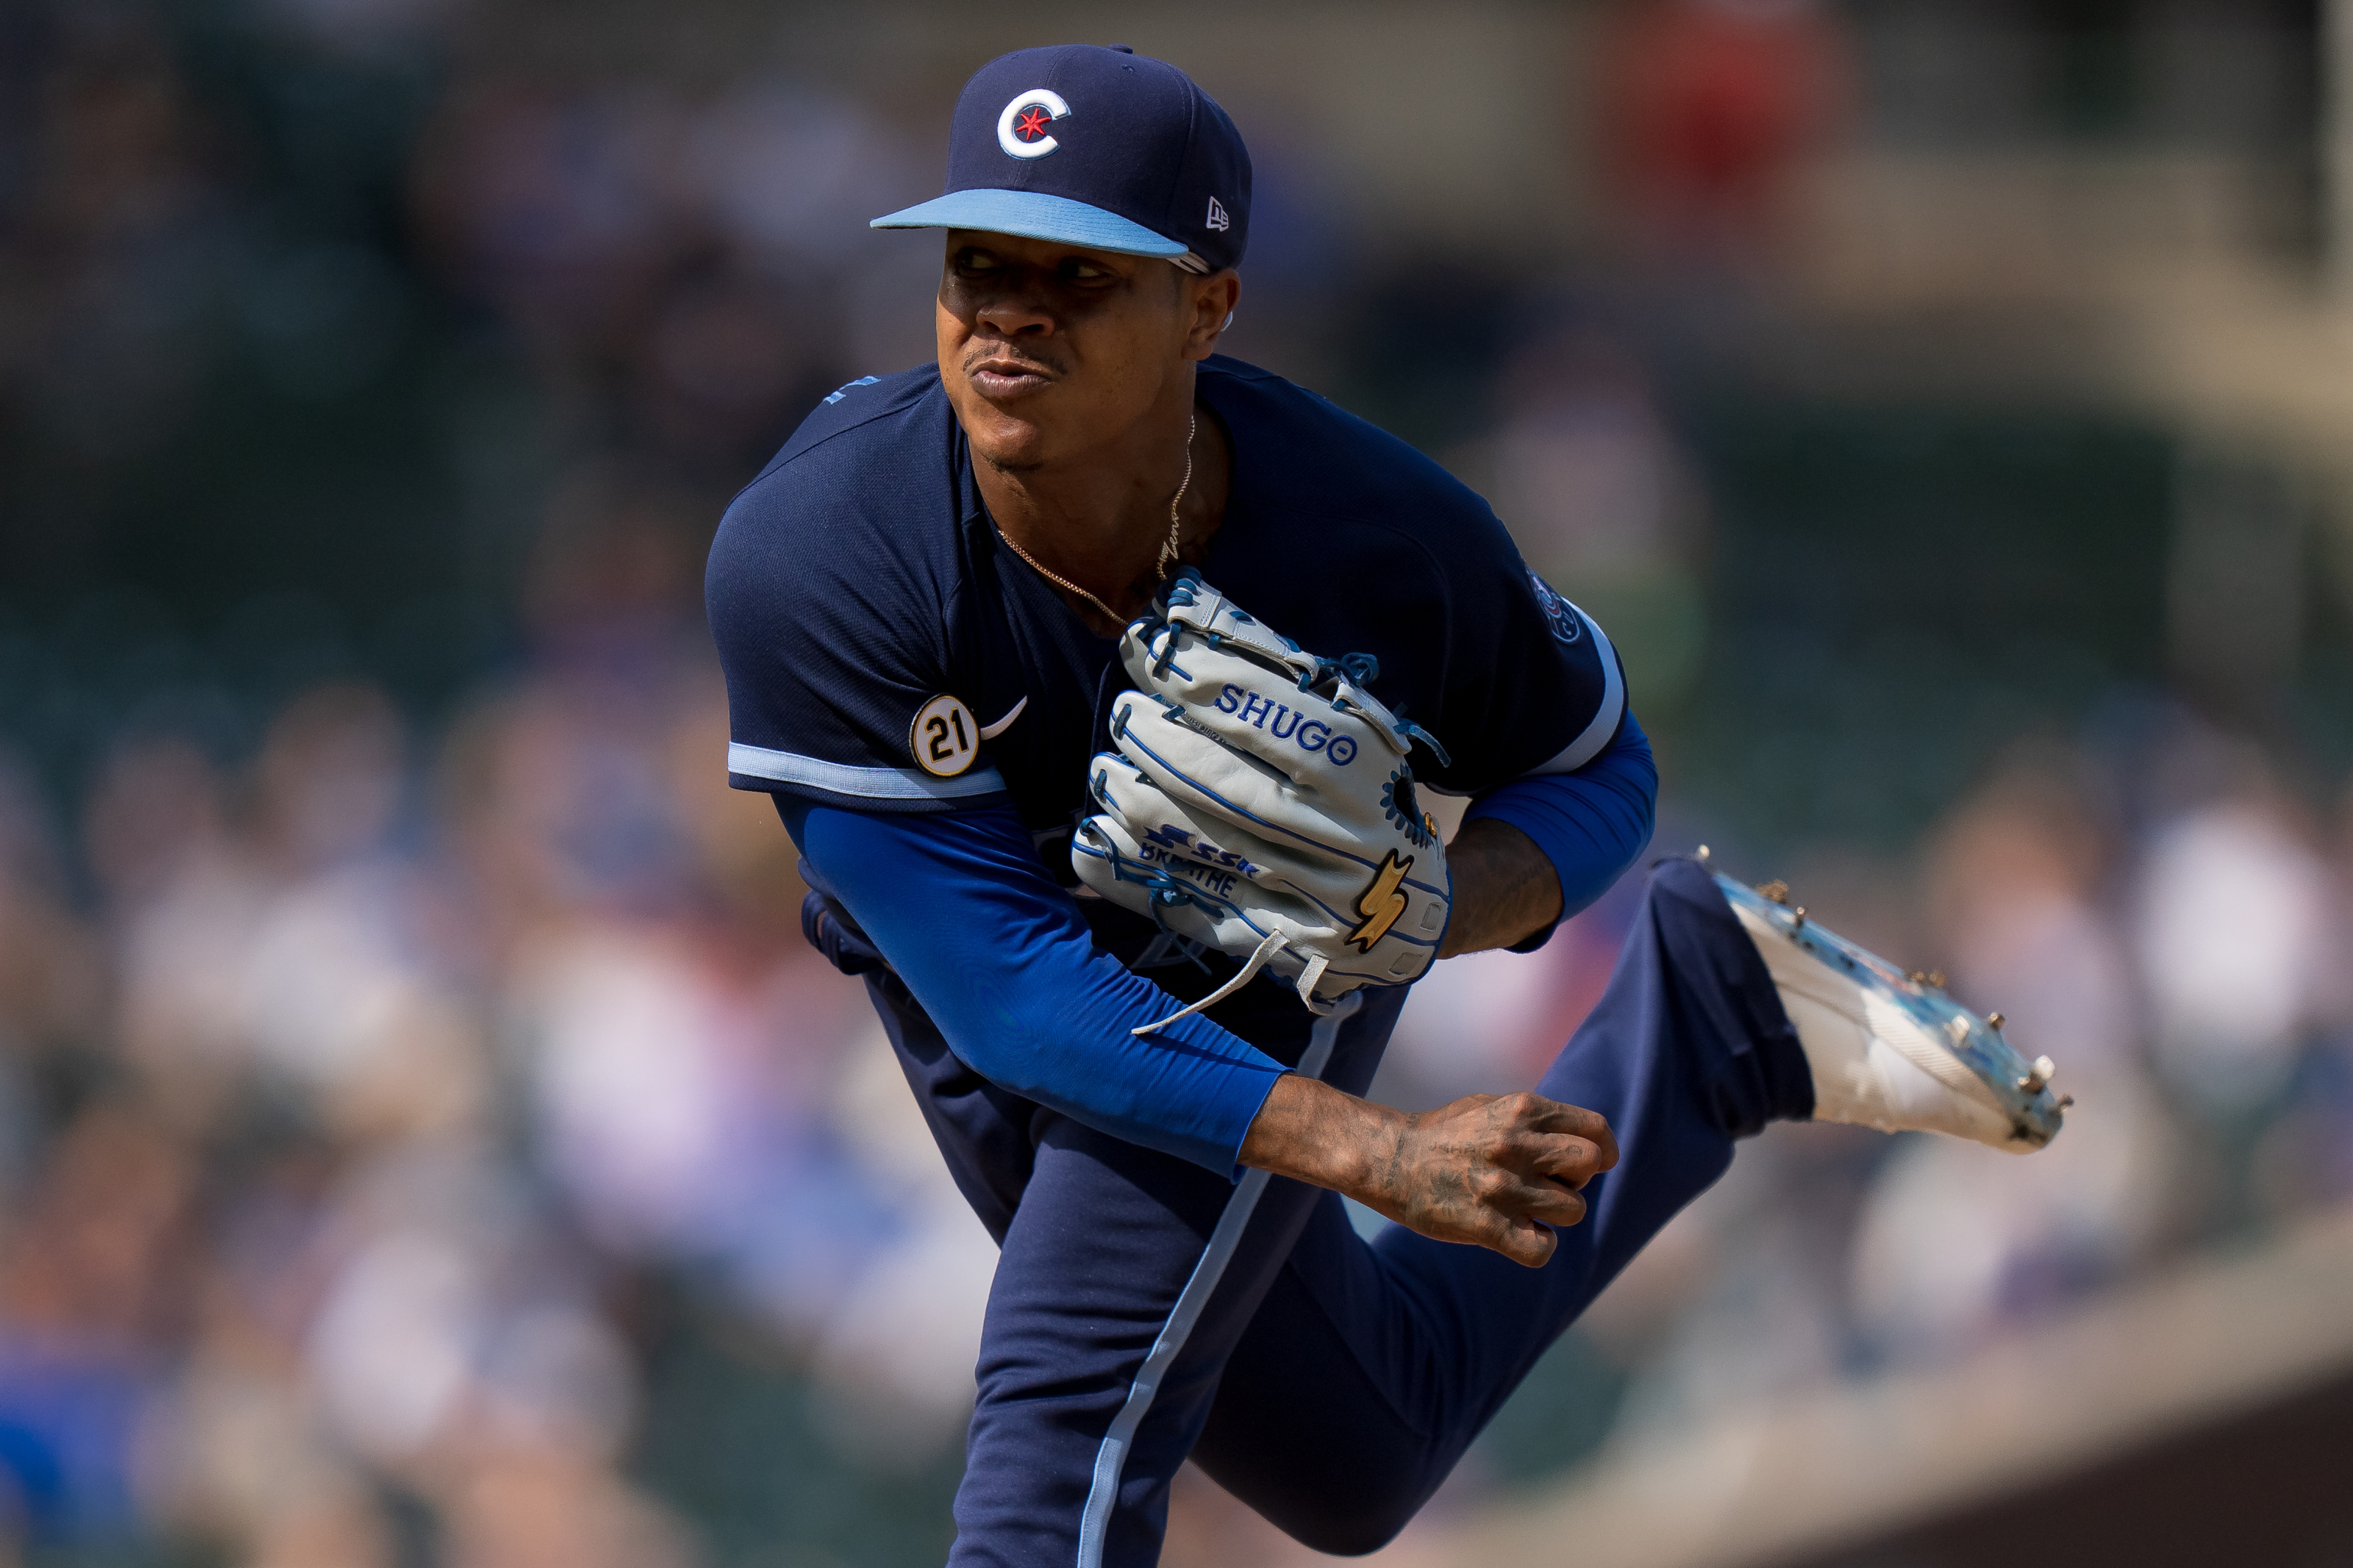 Cubs News: Marcus Stroman will start the spring training opener